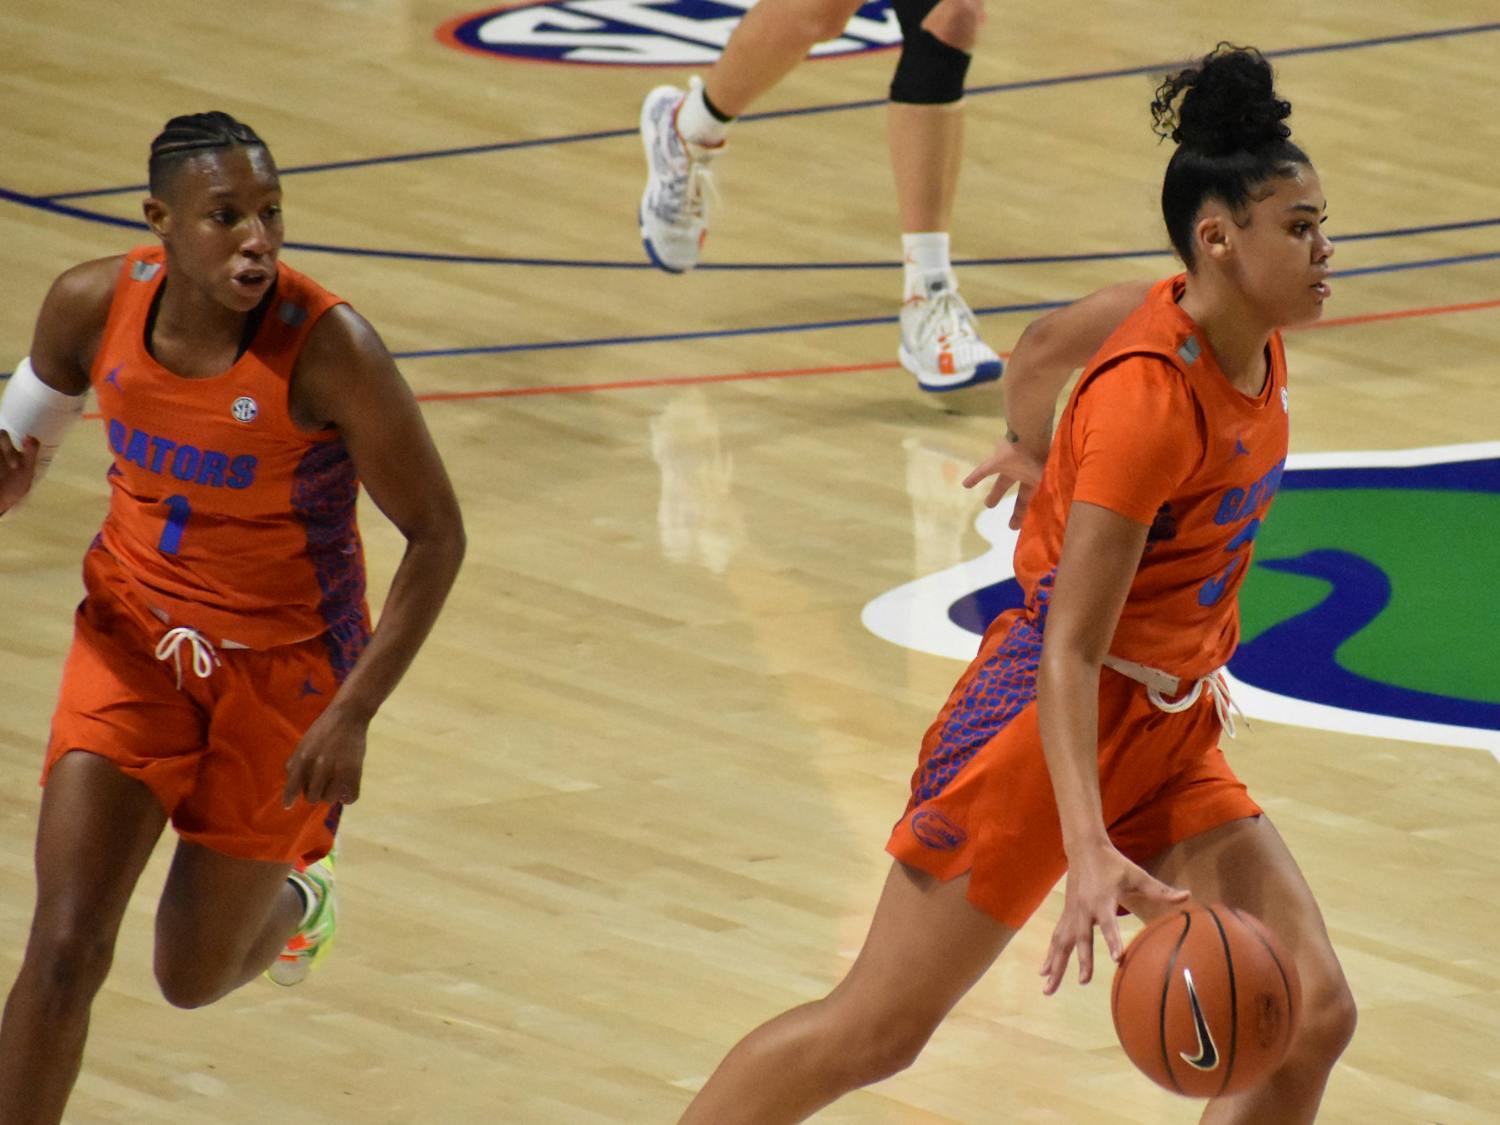 Kiki Smith (left) and Lavender Briggs (right), pictured during a game against Mizzou game Jan. 28. Smith scored a game-high 28 points for the Gators Sunday.